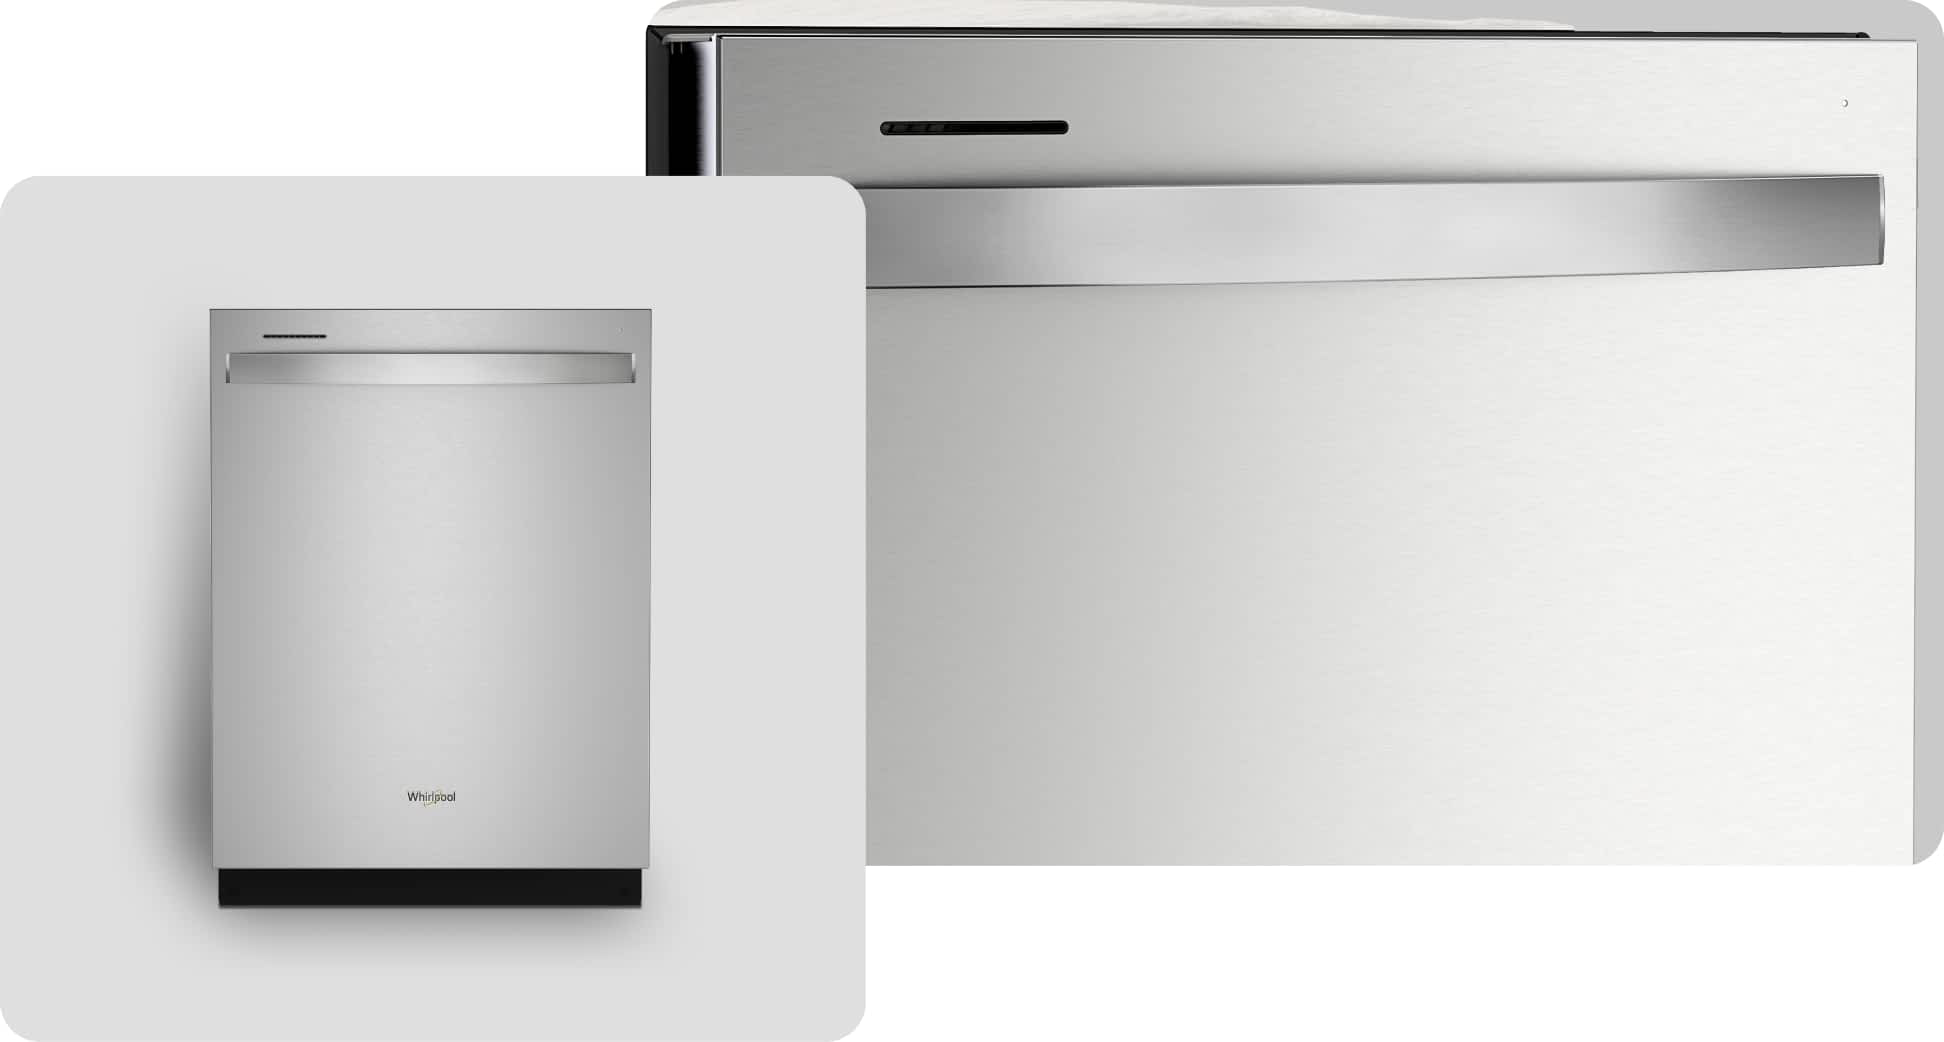 A Whirlpool® Dishwasher with a Fingerprint-Resistant Stainless Finish